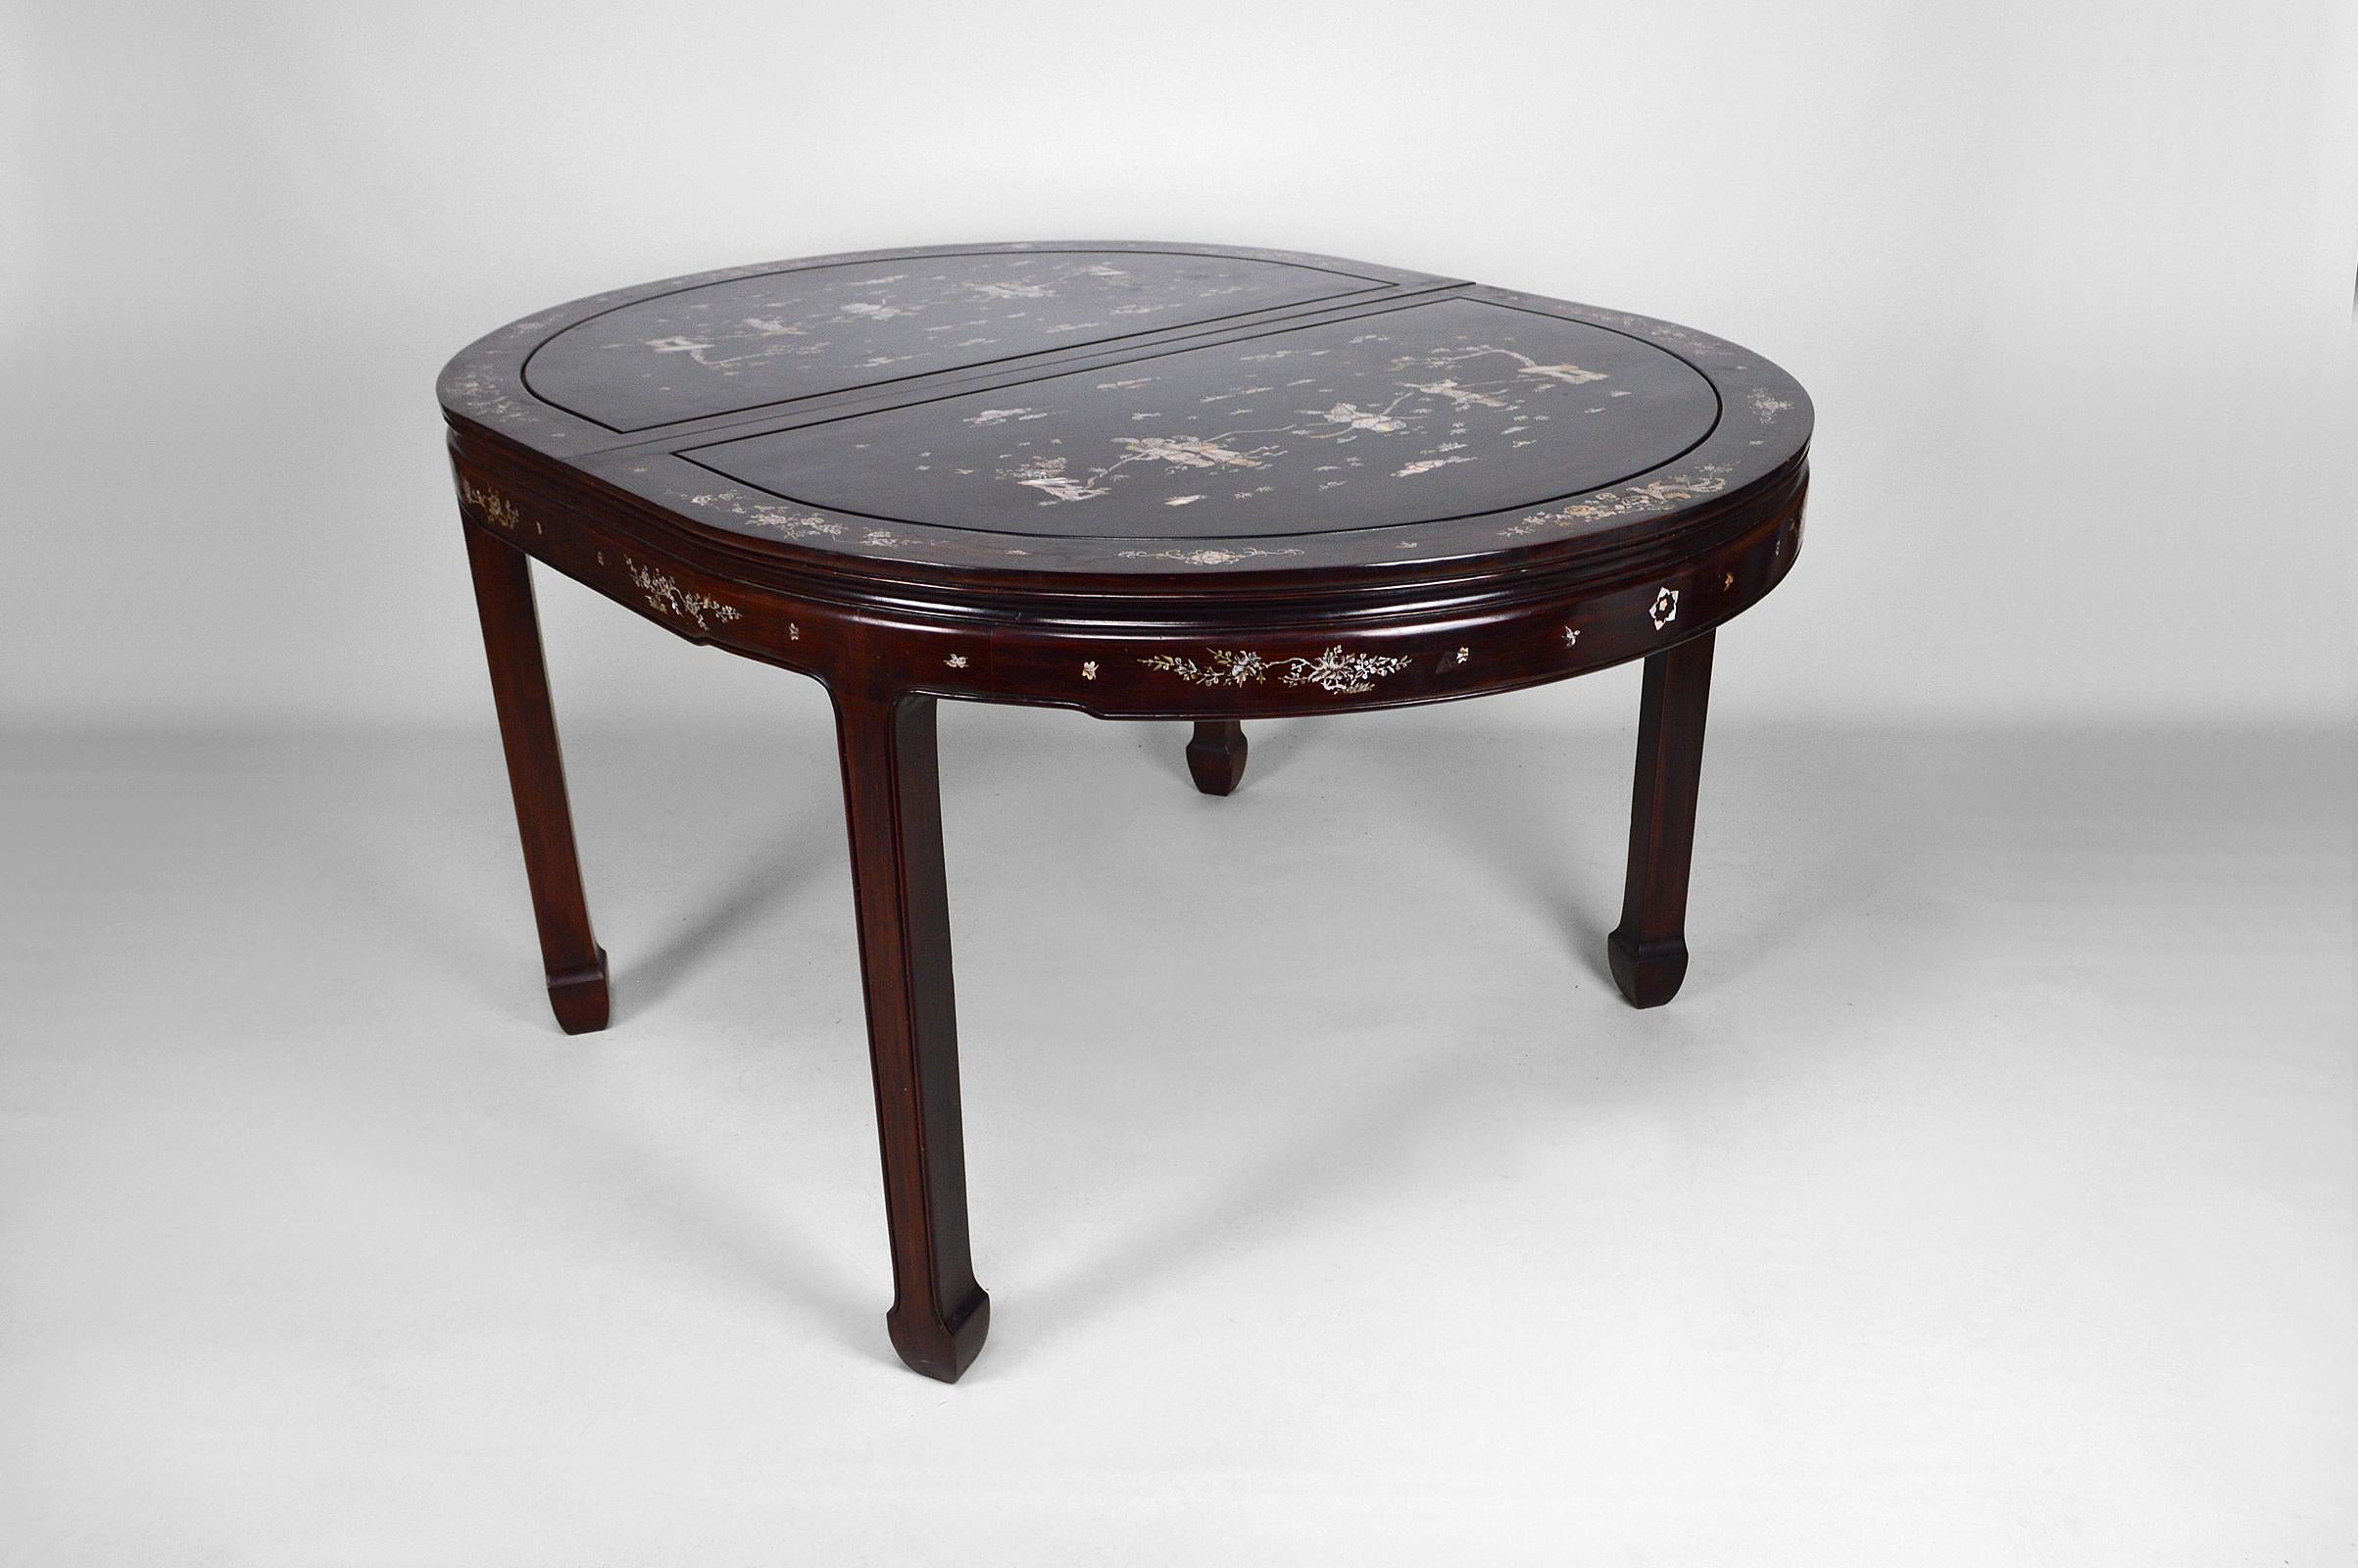 Chinese Export Asian Inlaid Wooden Dining Table with Extensions, Mid-20th Century